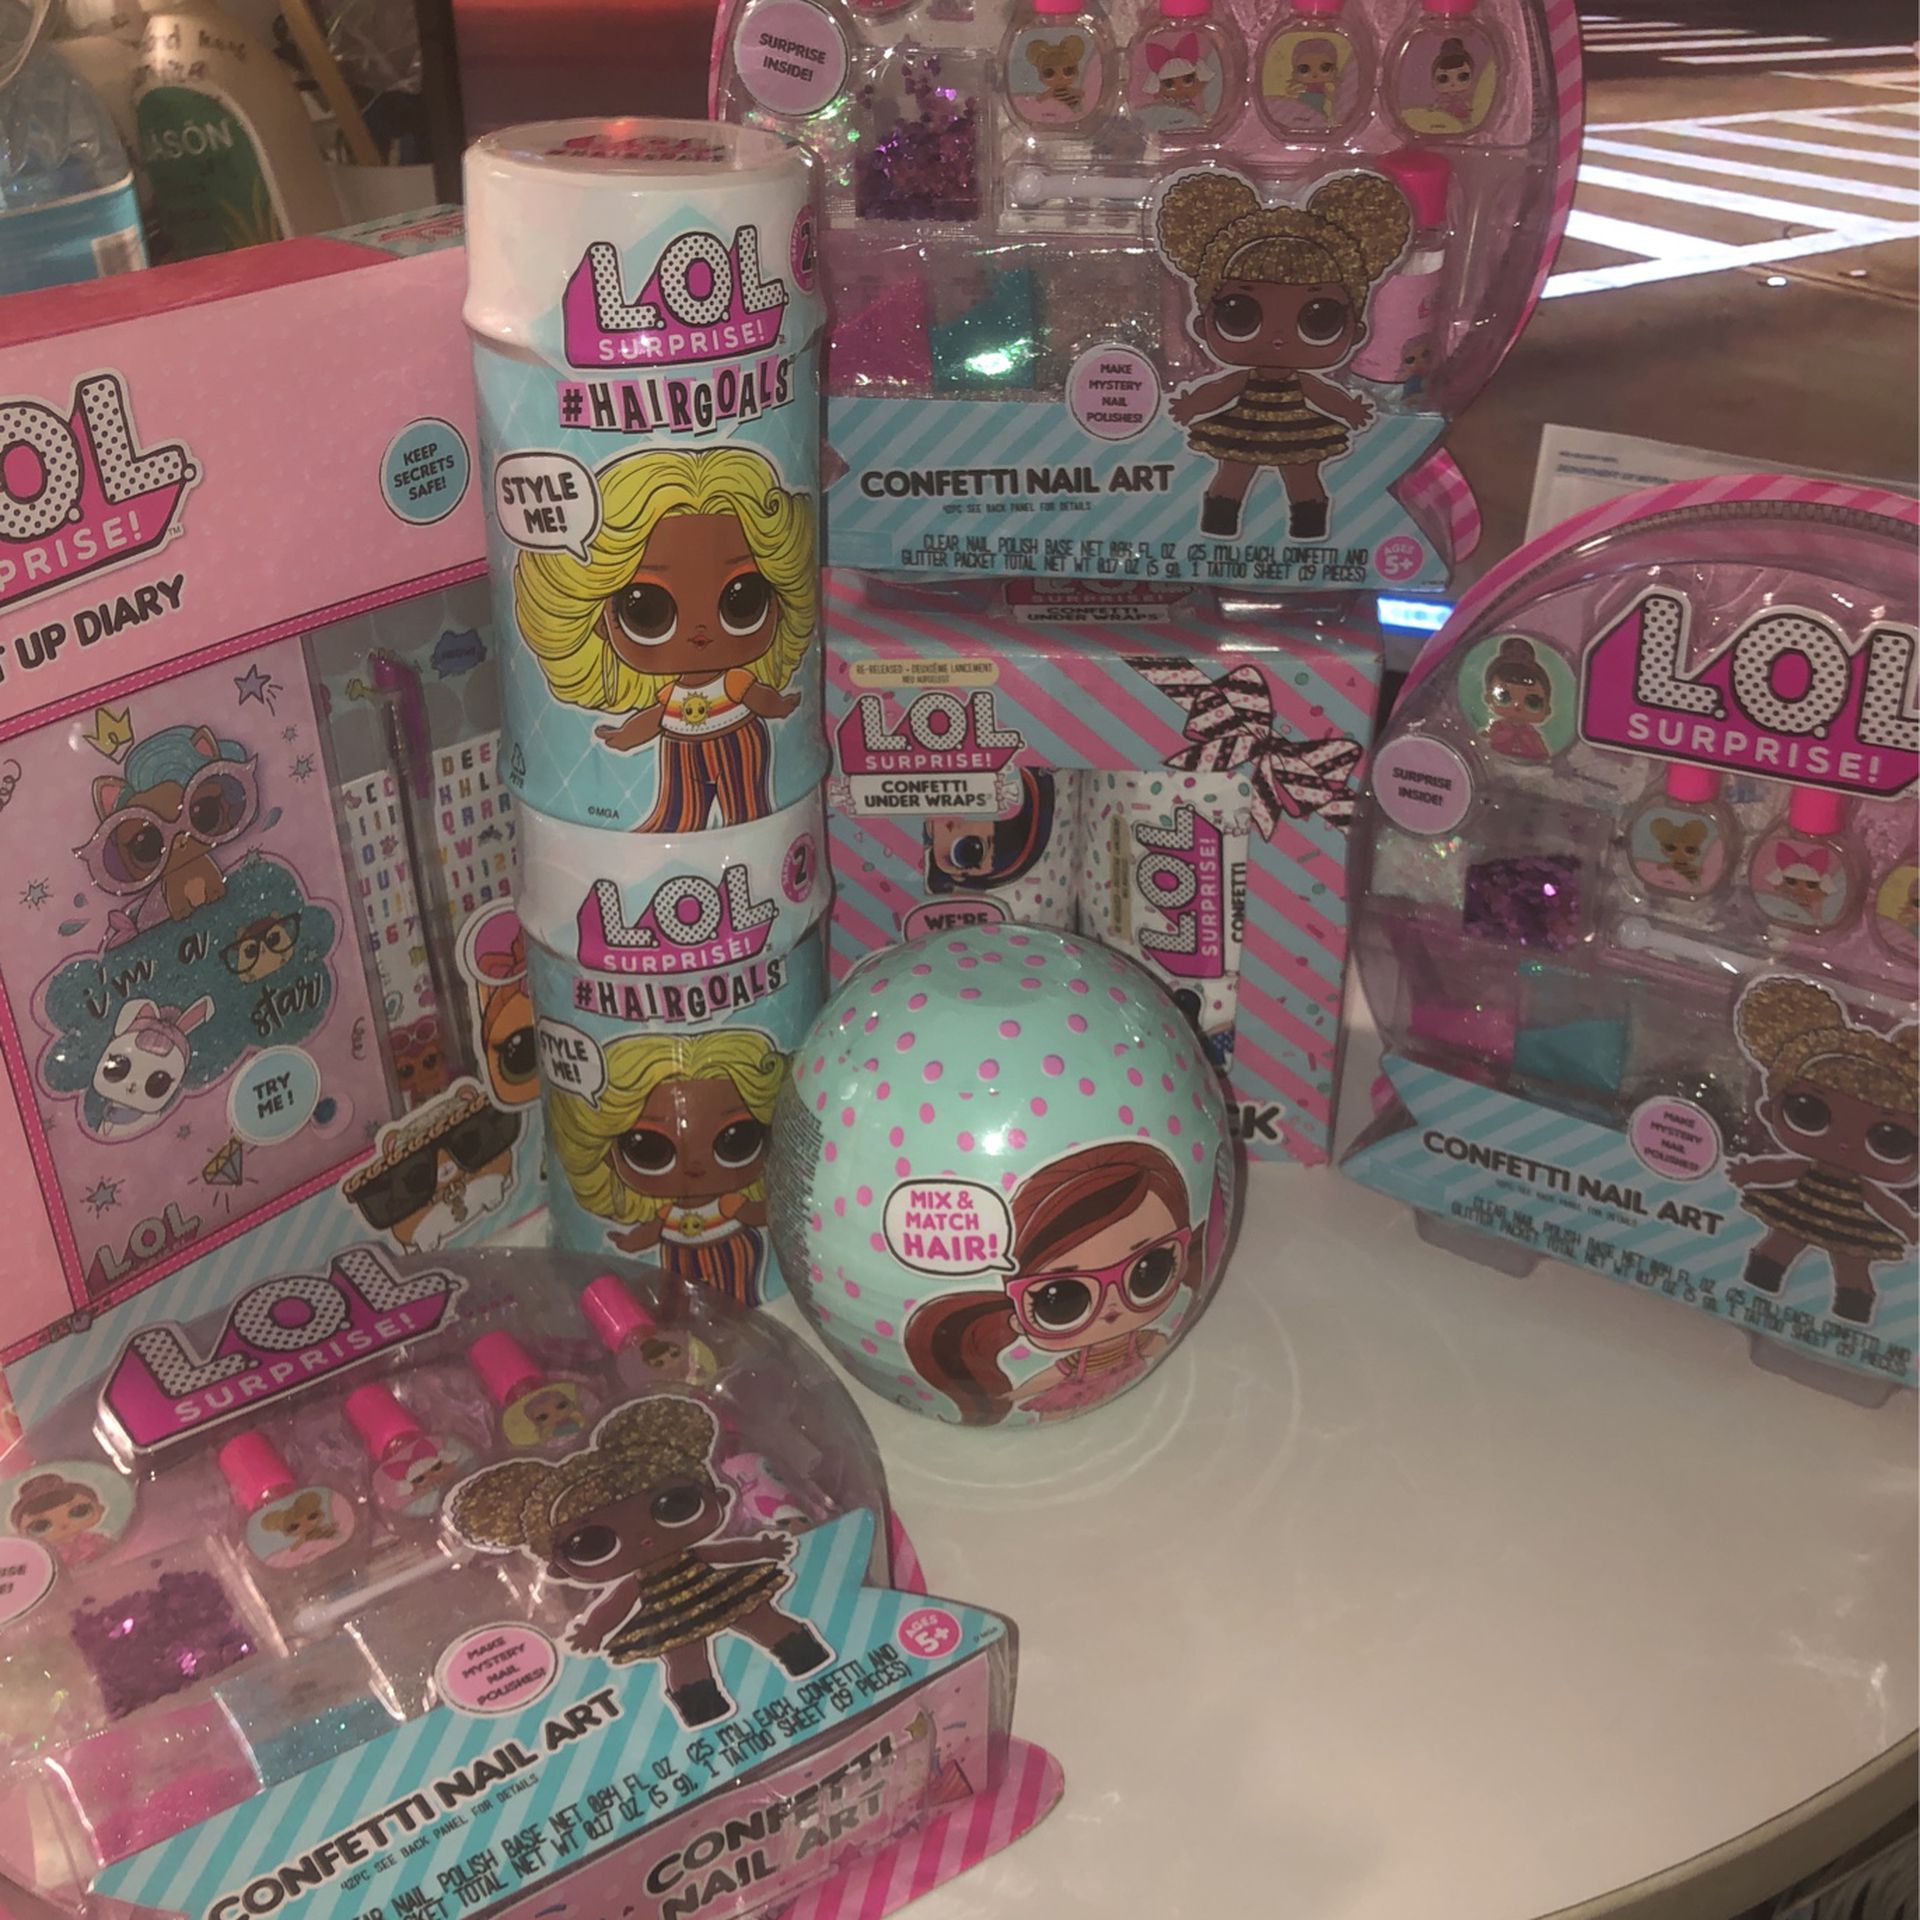 L.O.L. SURPRISE GIFTS!!! AVAILABLE FOR THIS CHRISTMAS HOLIDAYS . L.O.L HAIRGOALS $17, CONFETTI NAIL ART $12 . L.O.L. CONFETTI UNDER WRAPS $25